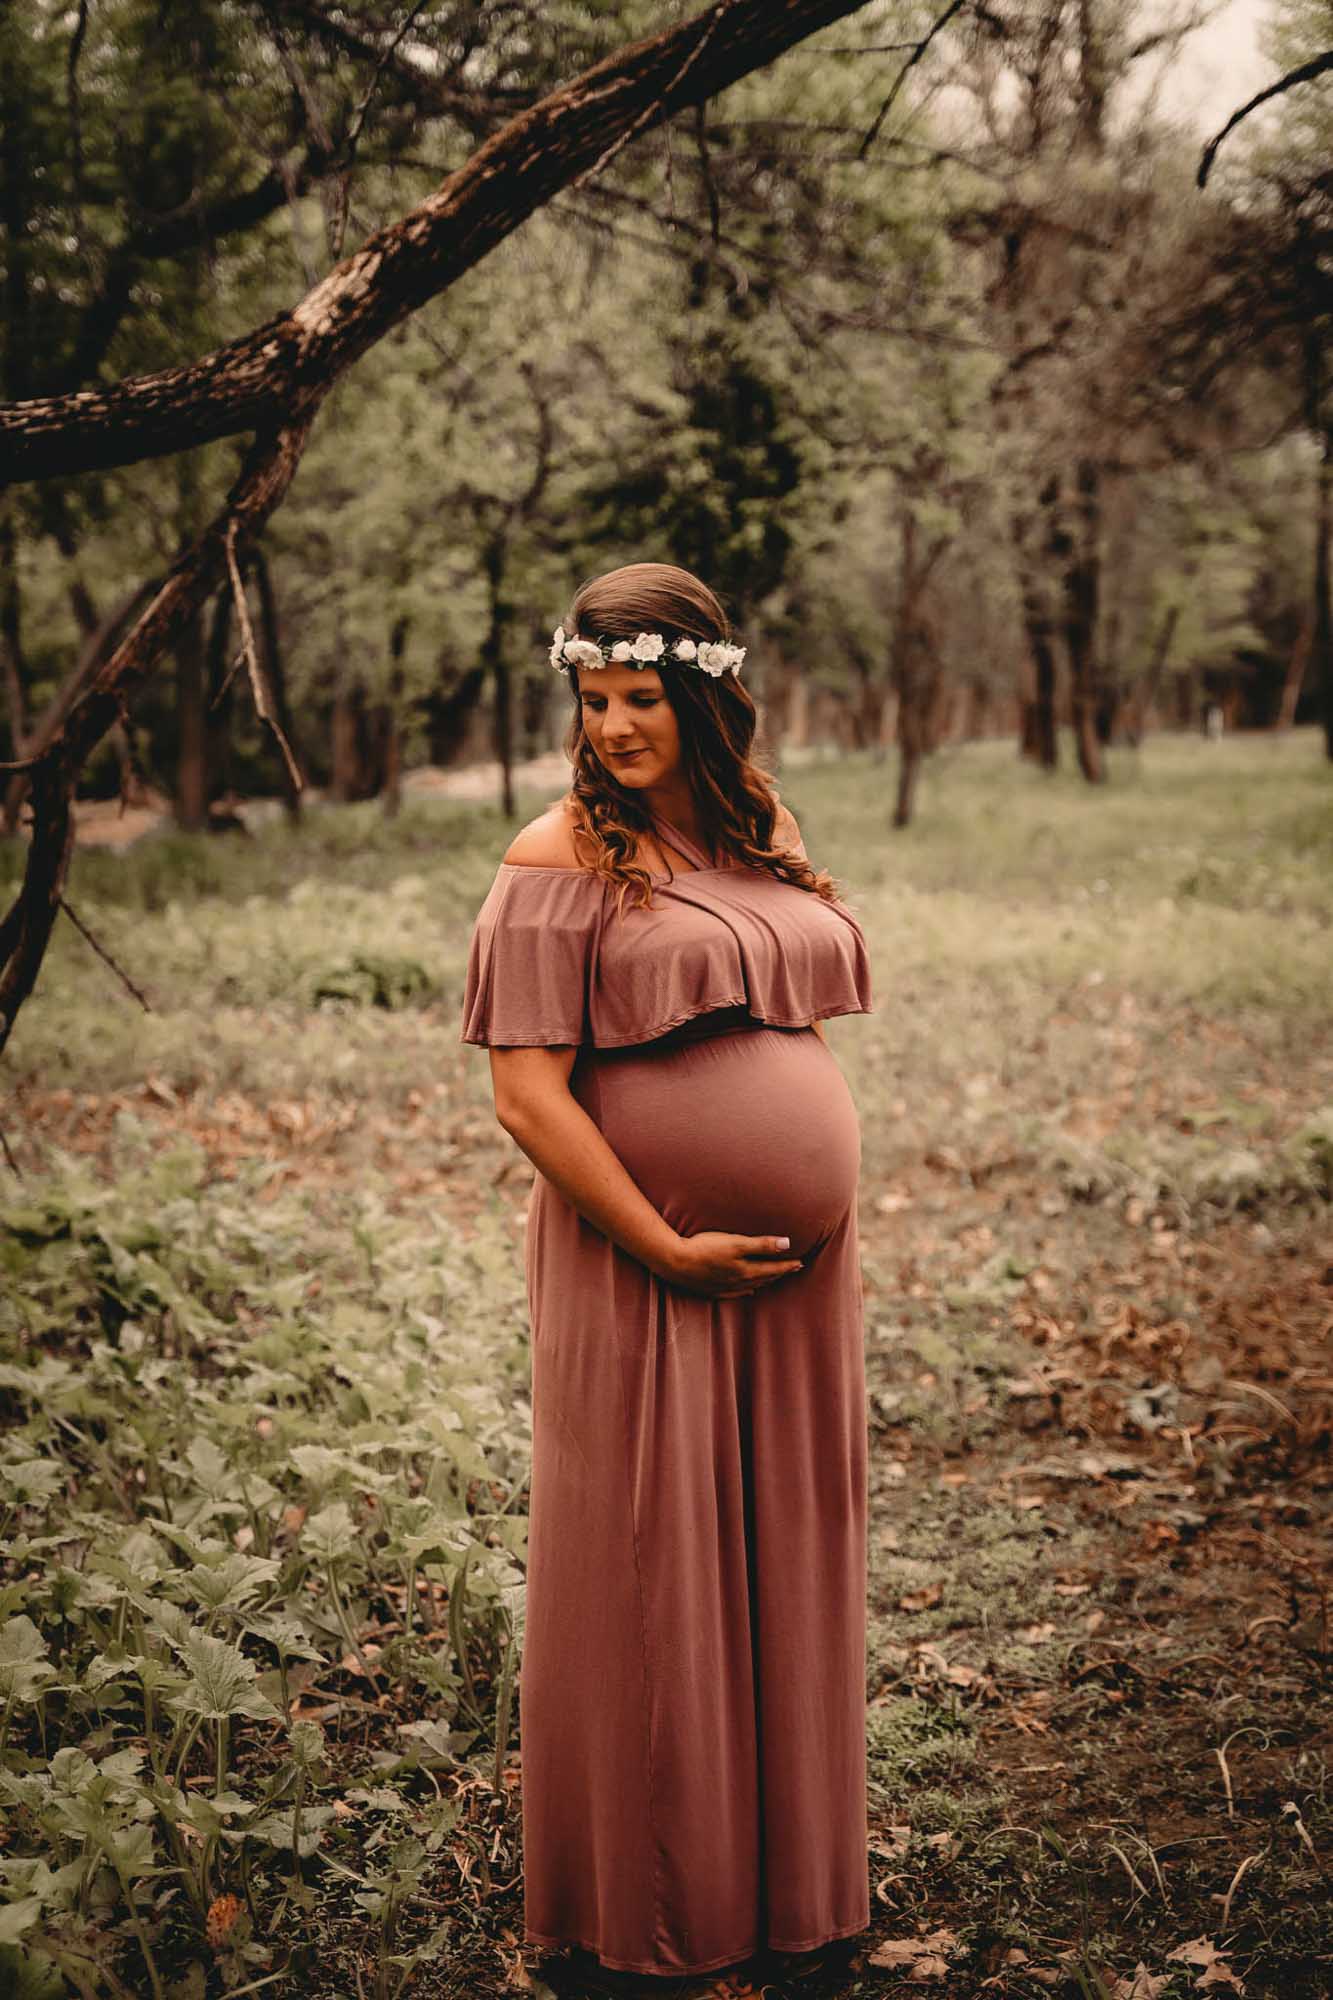 Moving Maternity Photos in the Forest | Melissa Lynn Photography | Featured on Equally Wed, the leading LGBTQ+ wedding magazine 